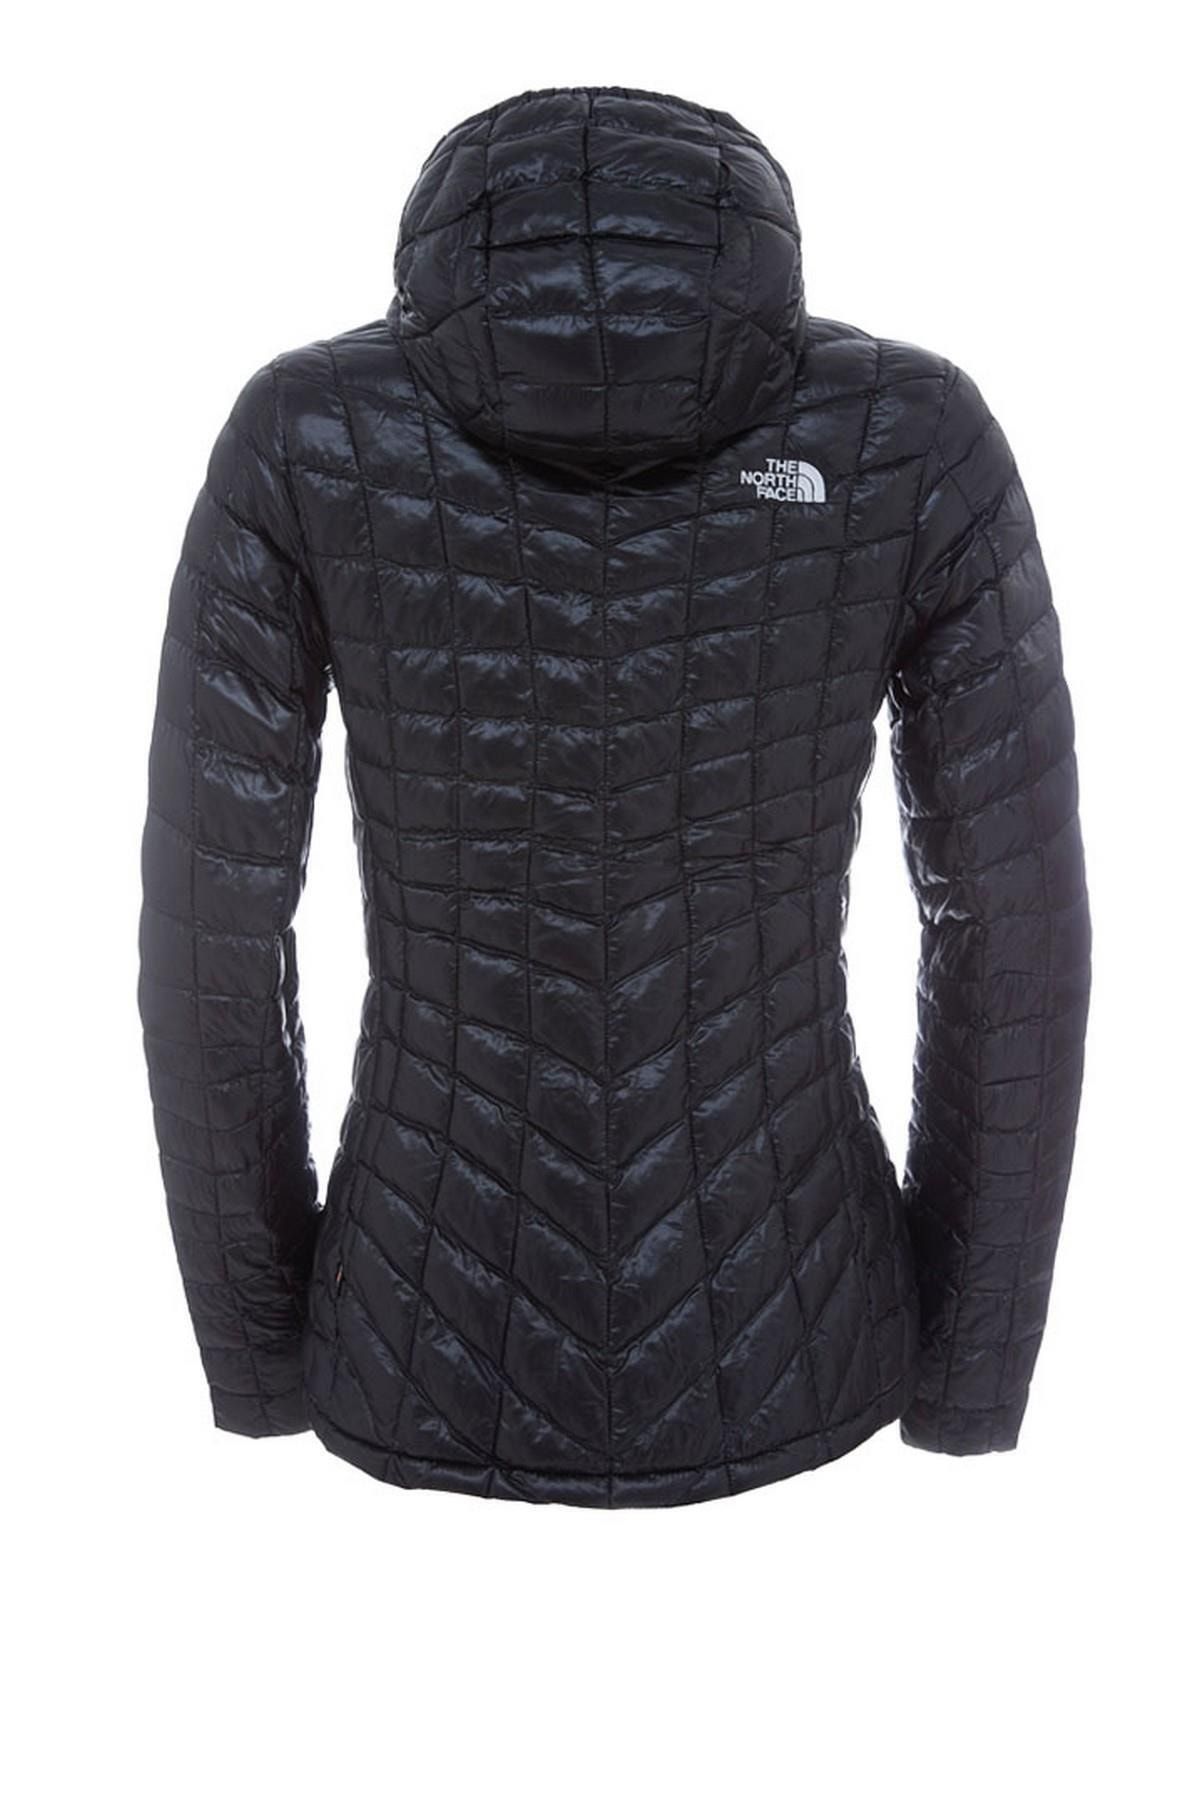 The North Face Thermoball Kadın Mont